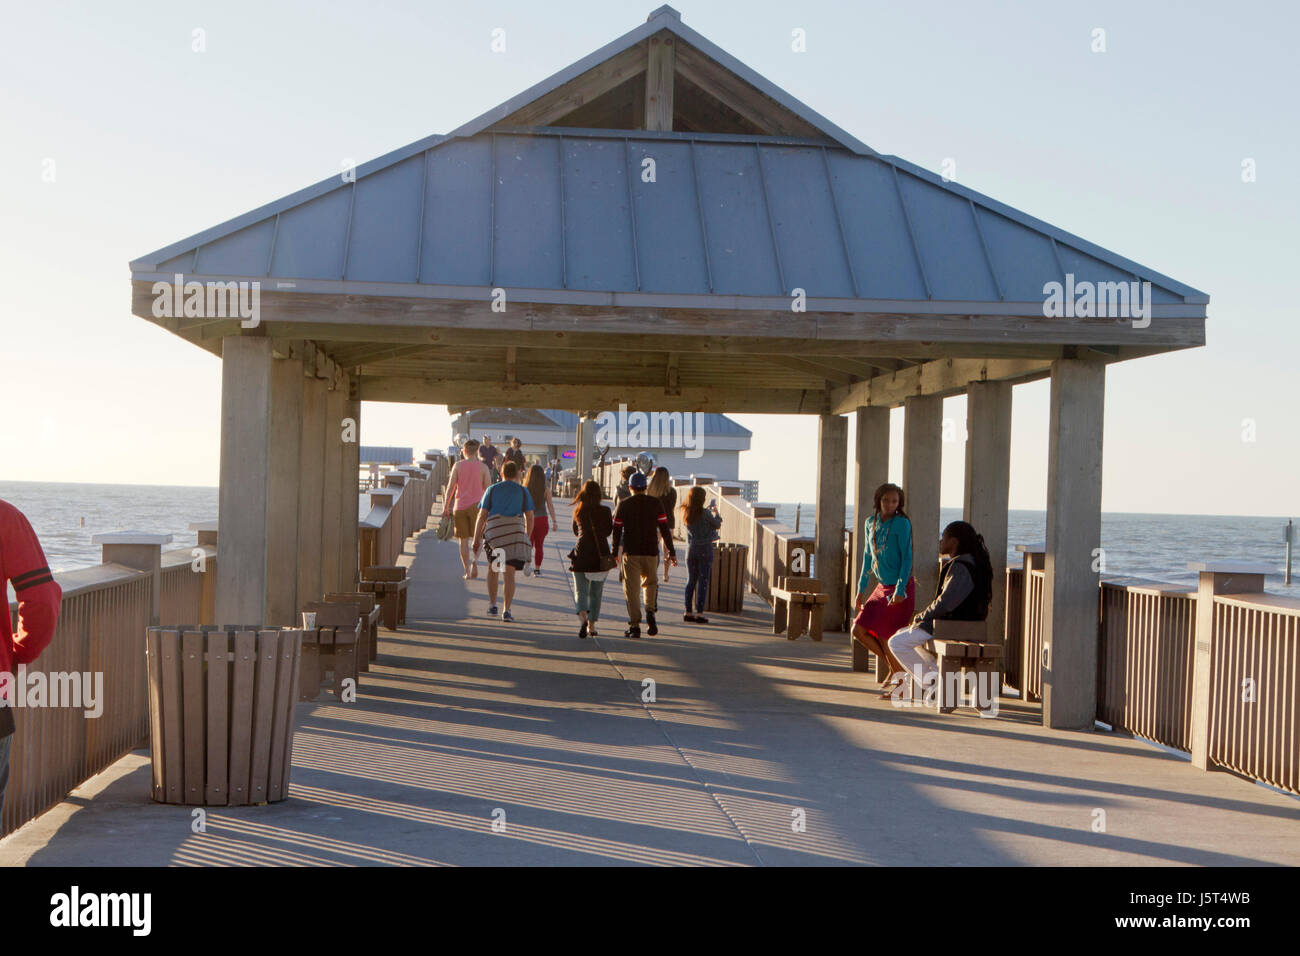 Clearwater Beach; Florida; USA - January 24, 2017:  Tourists gather to watch the sunset at Pier 60 on Clearwater Beach, a 1,080 foot fishing pier and  Stock Photo